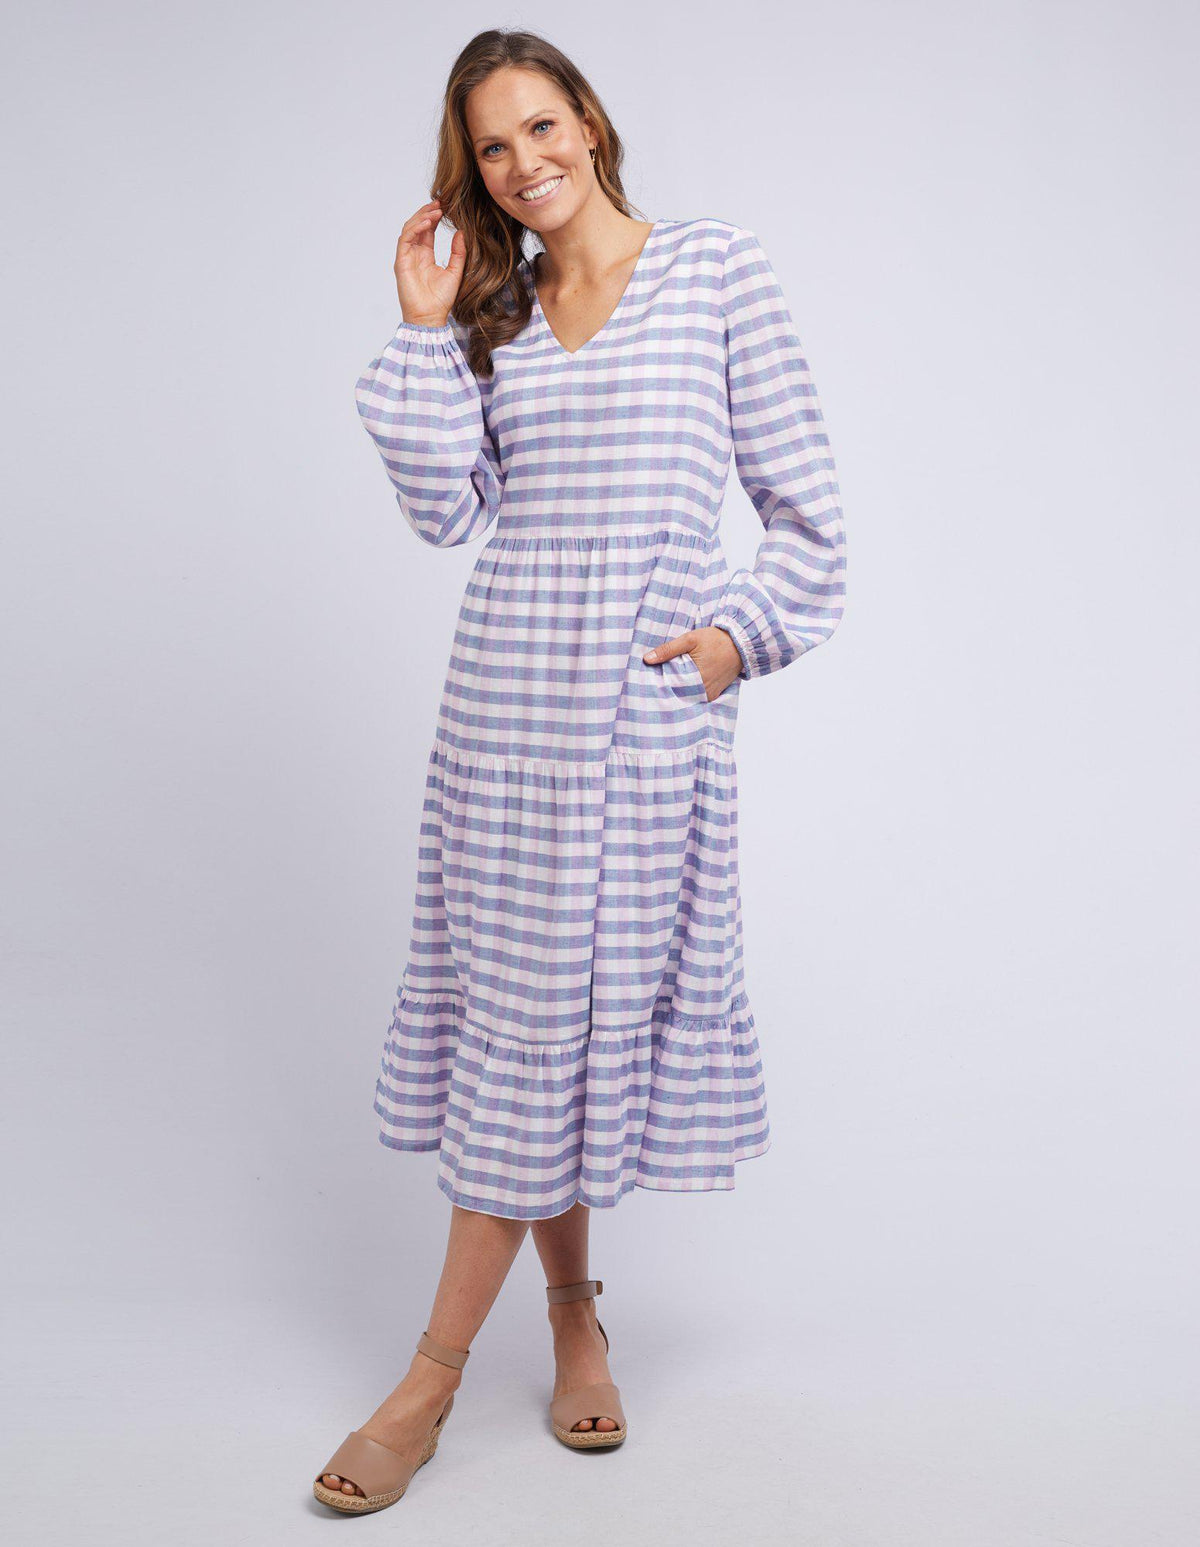 Gracie Gingham Dress - Pink And Blue Check - Elm Lifestyle - FUDGE Gifts Home Lifestyle